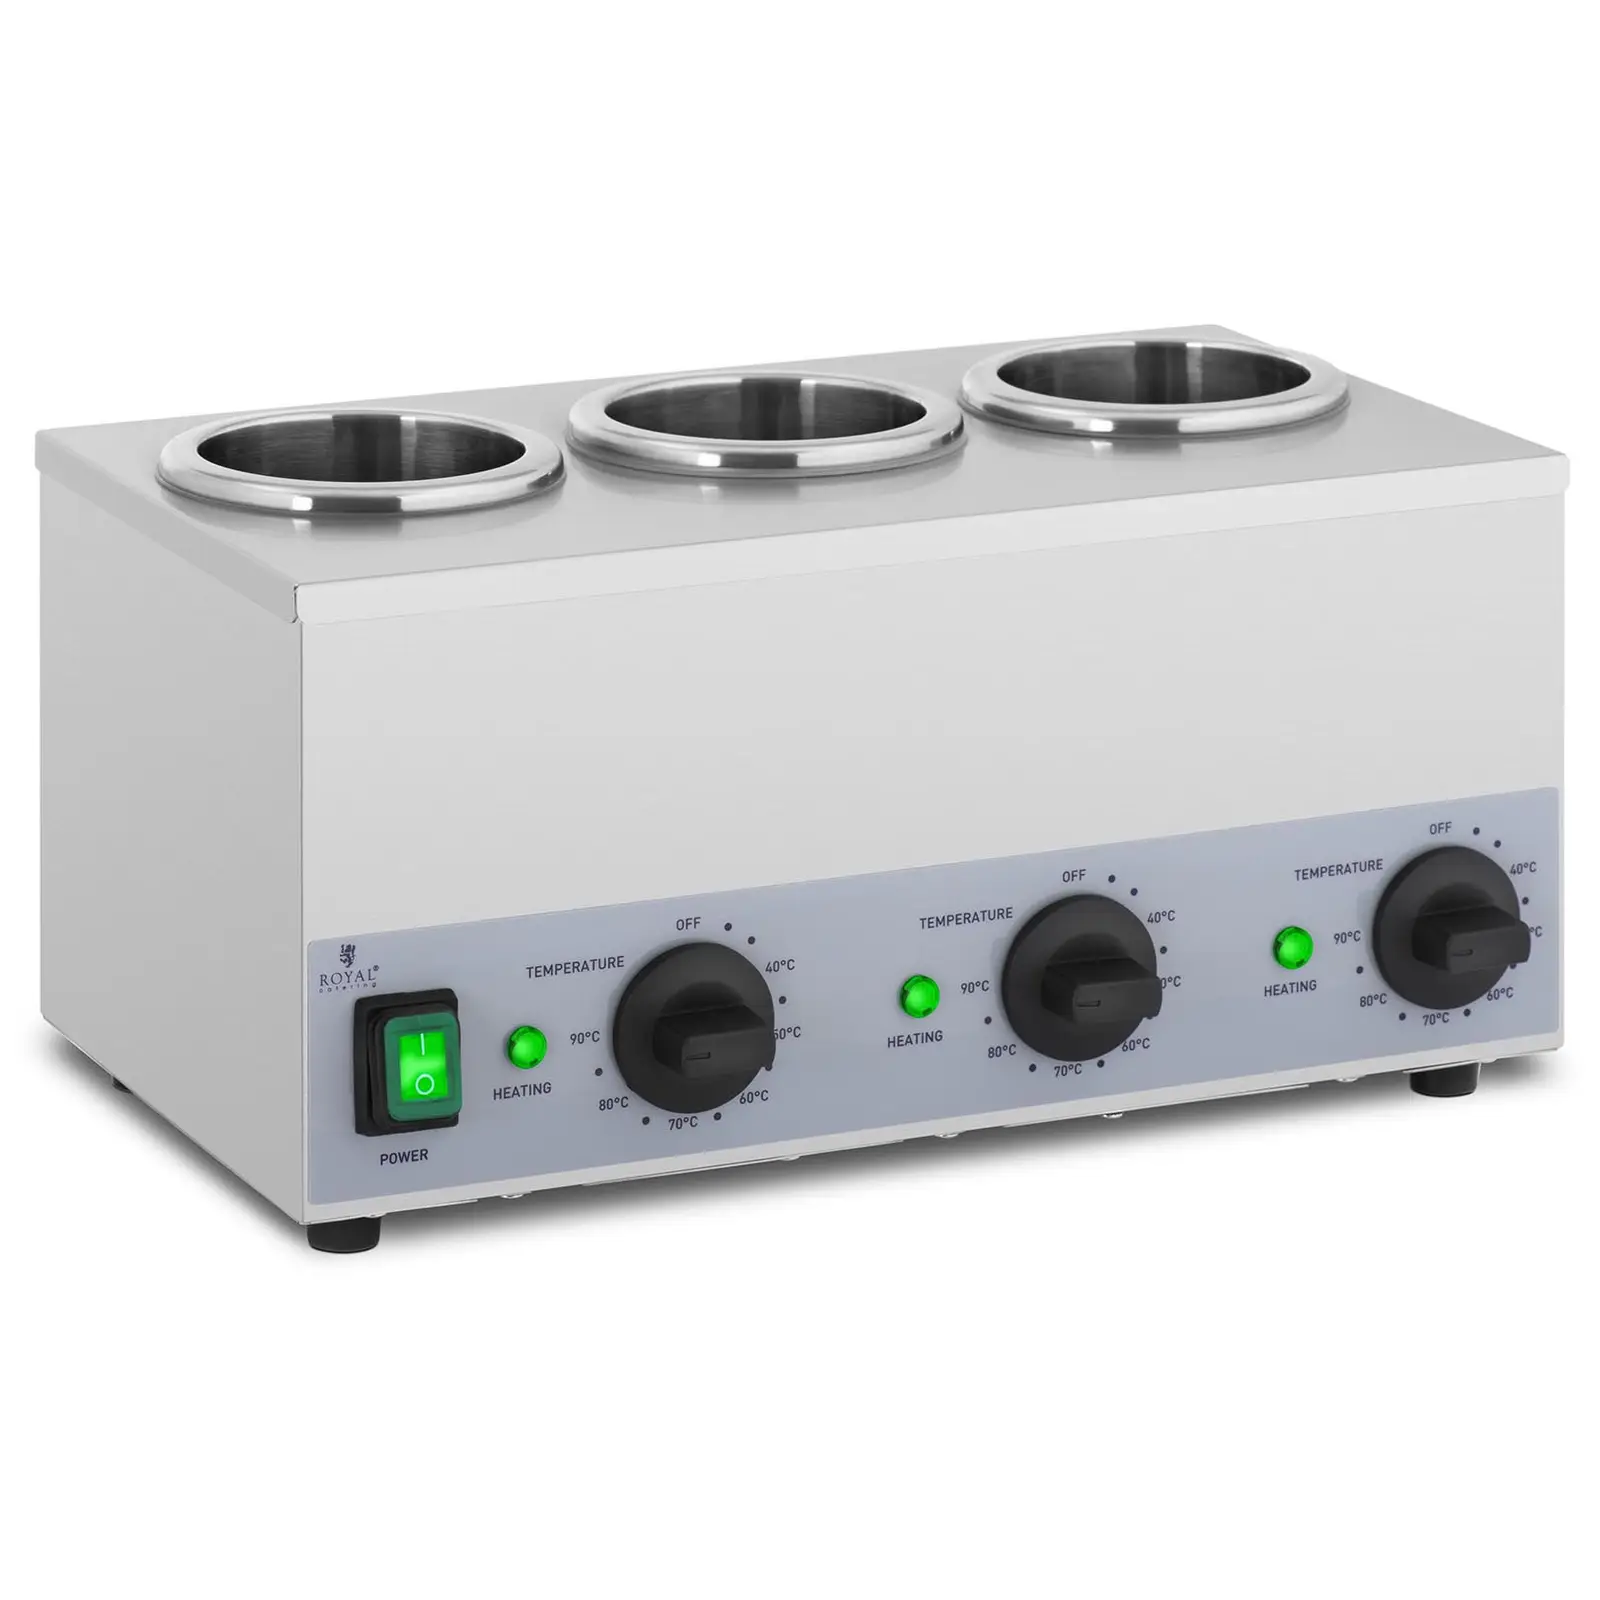 Sauce Warmer - 3 x 1 L - Control panel at the bottom - Royal Catering